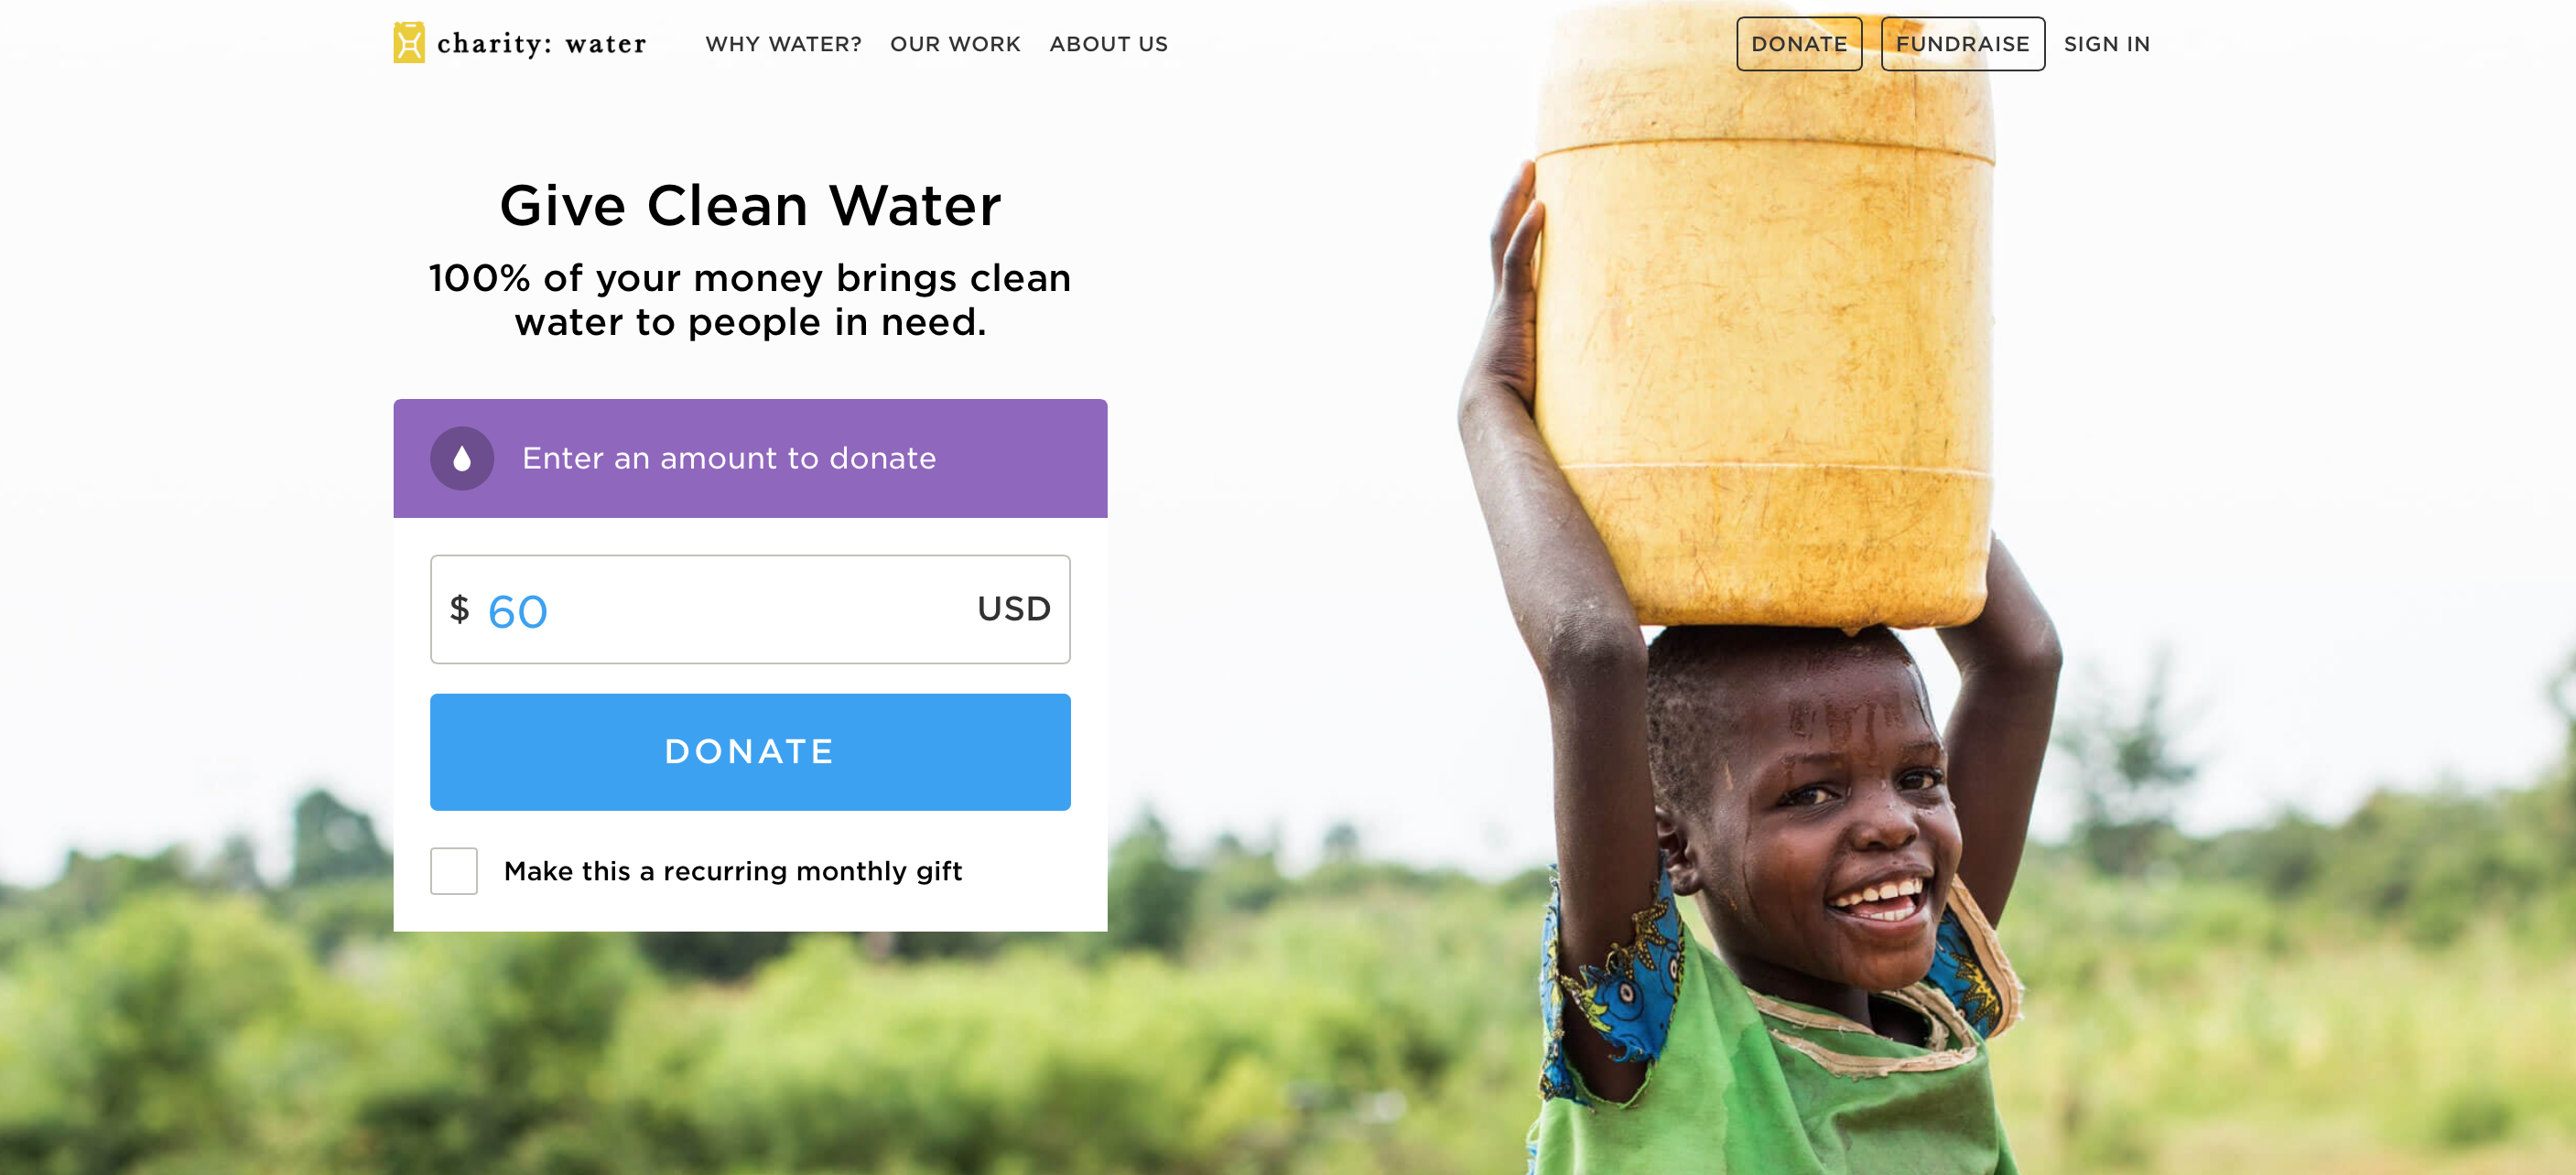 online fundraising examples from charity:water